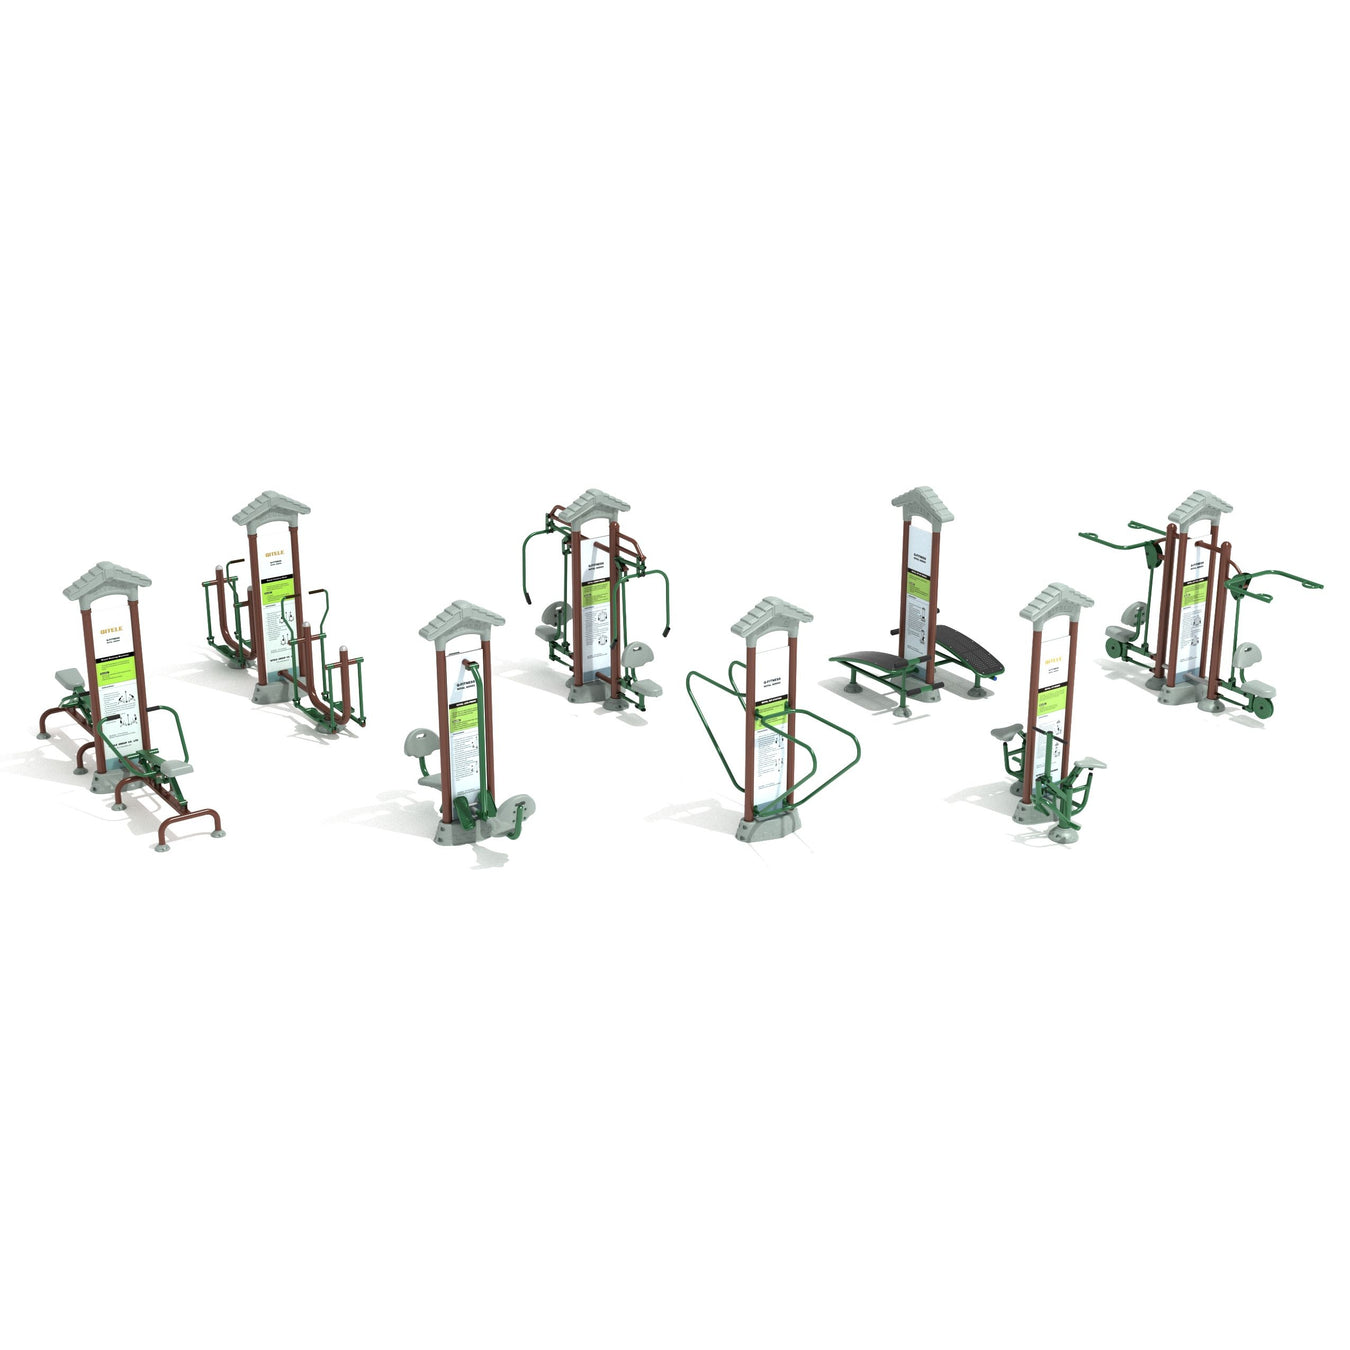 Outdoor Exercise Stations For Sale